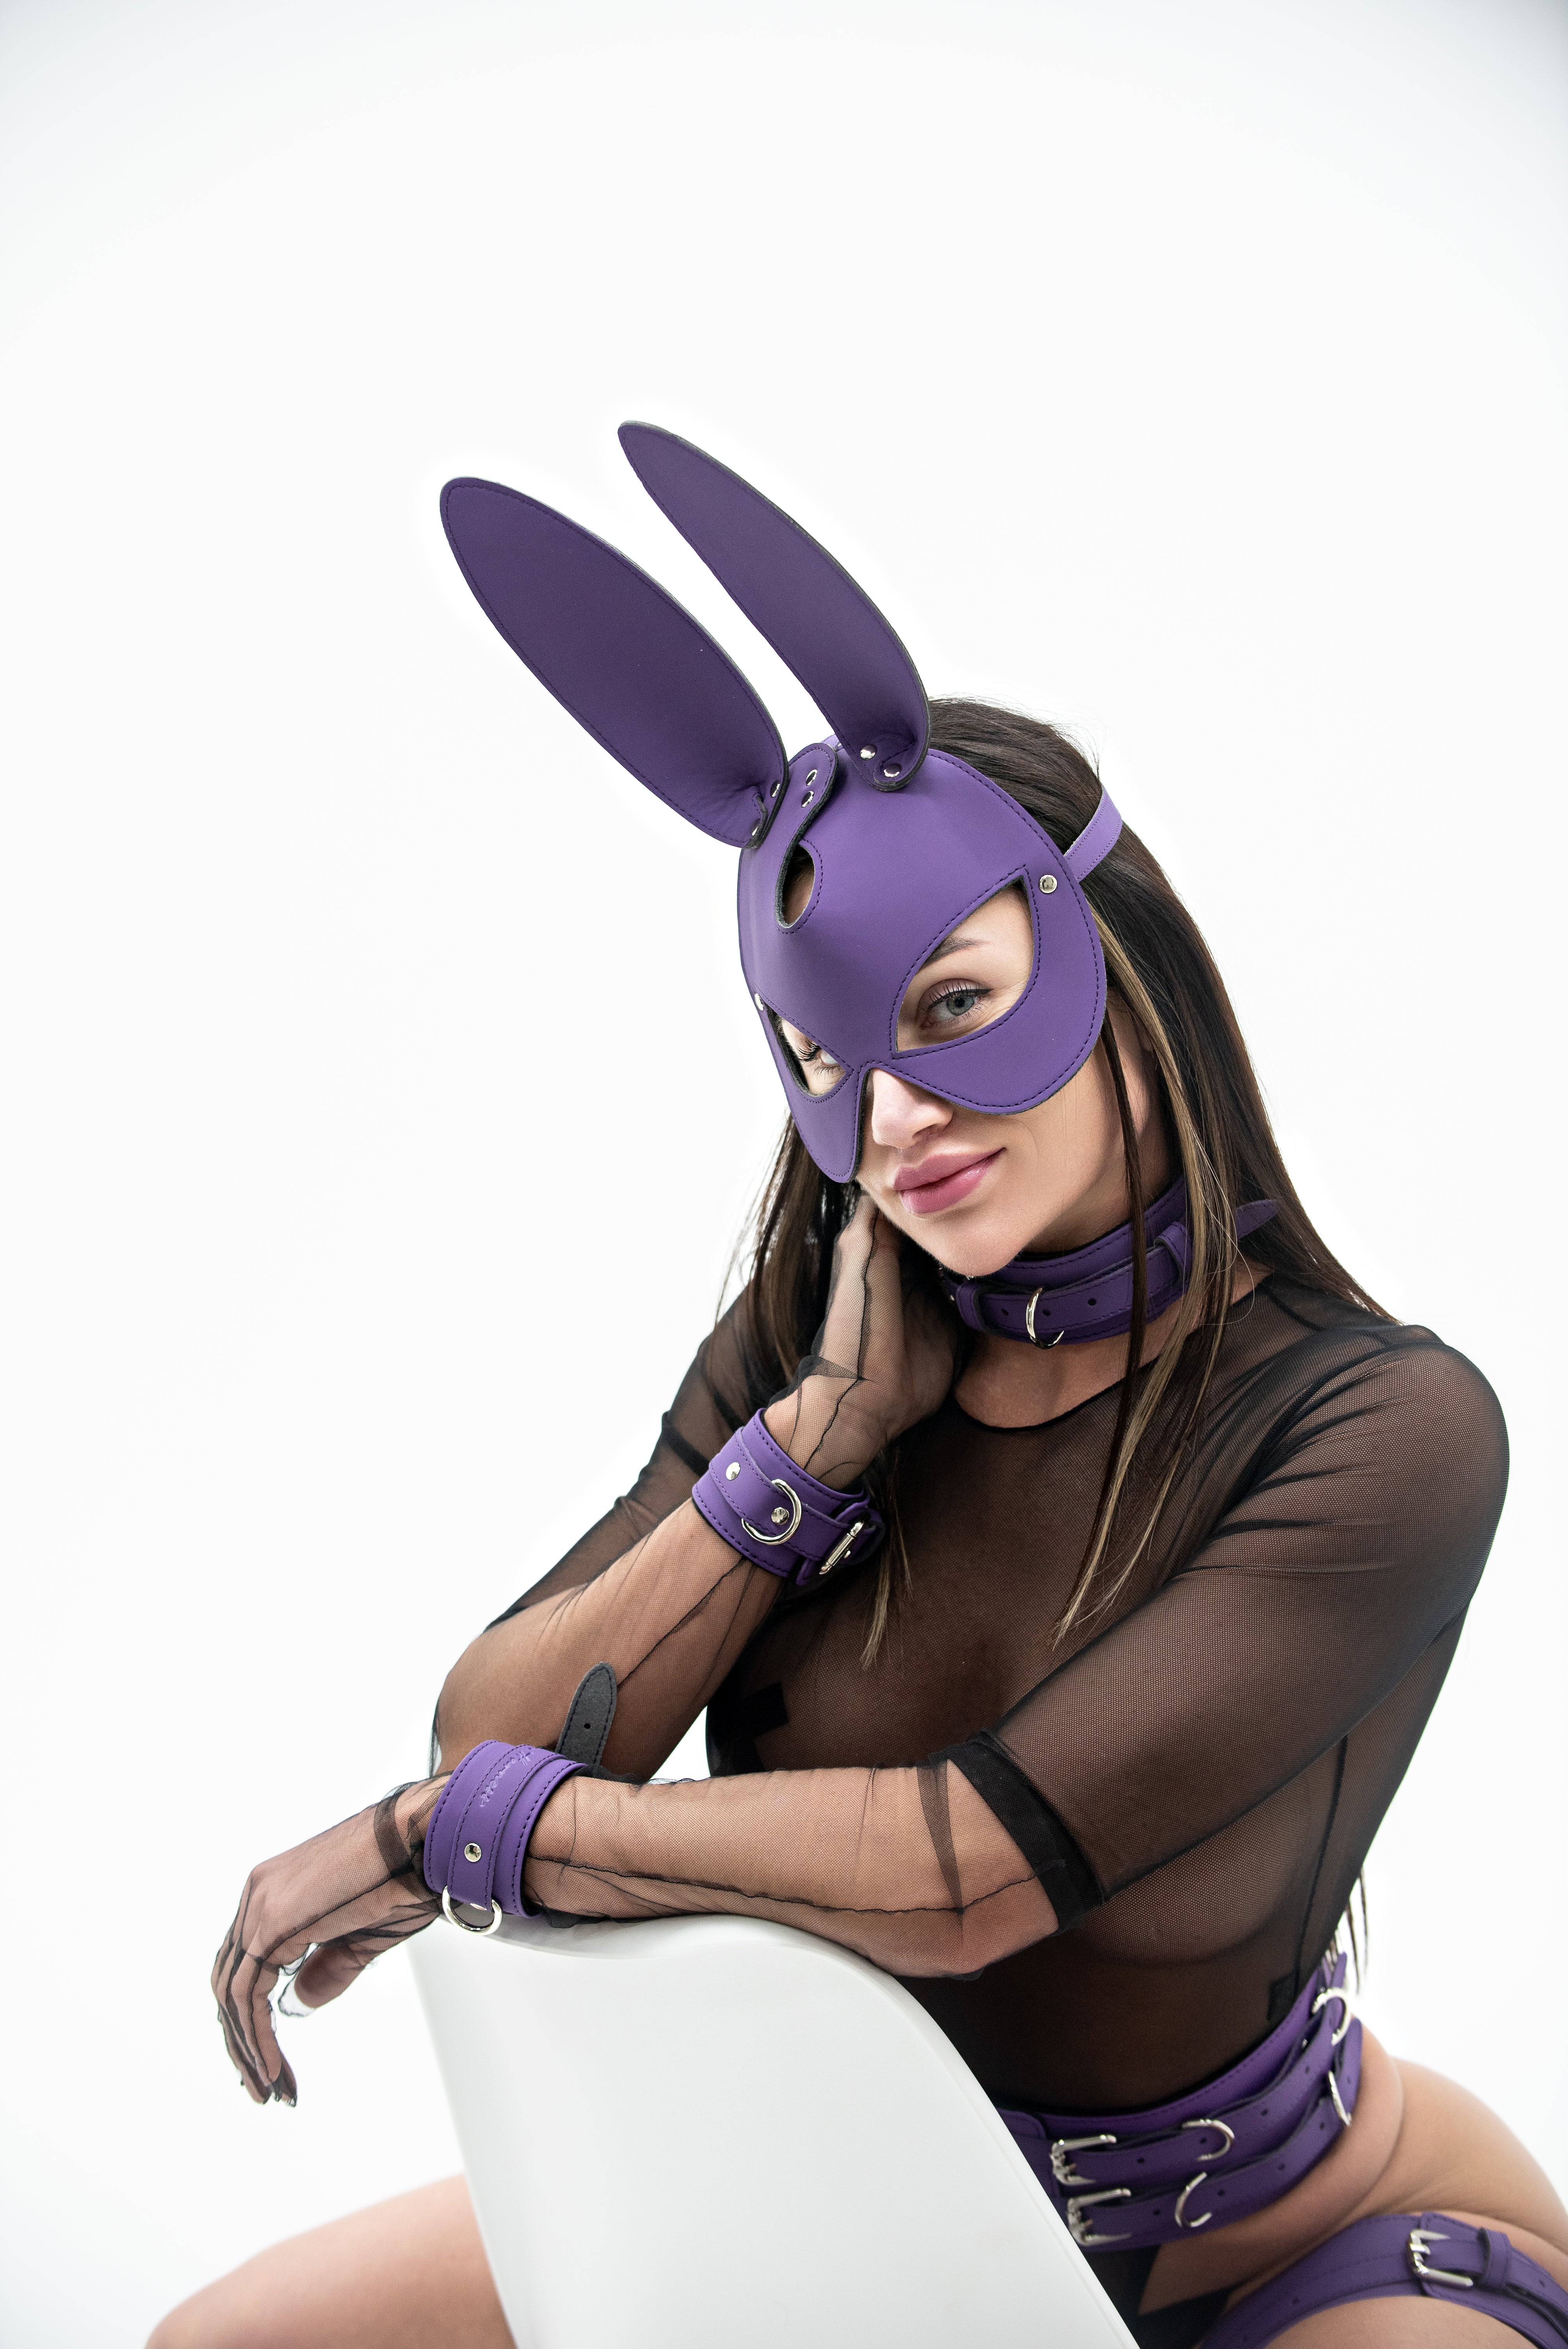 Purple Faux Leather Bunny Face mask.